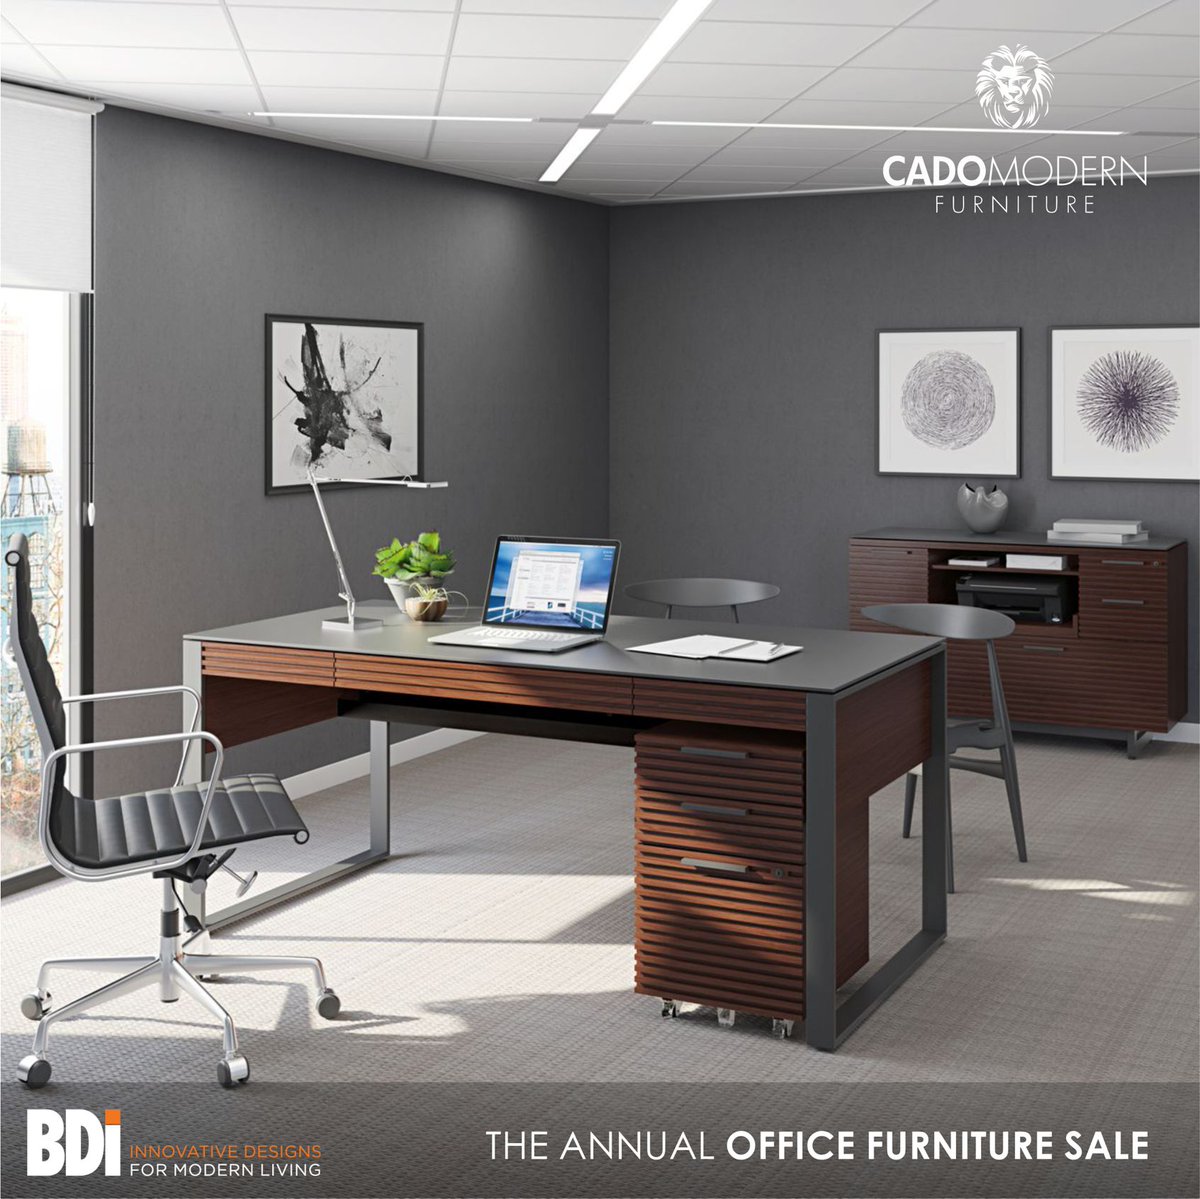 Bdiofficesale Hashtag On Twitter